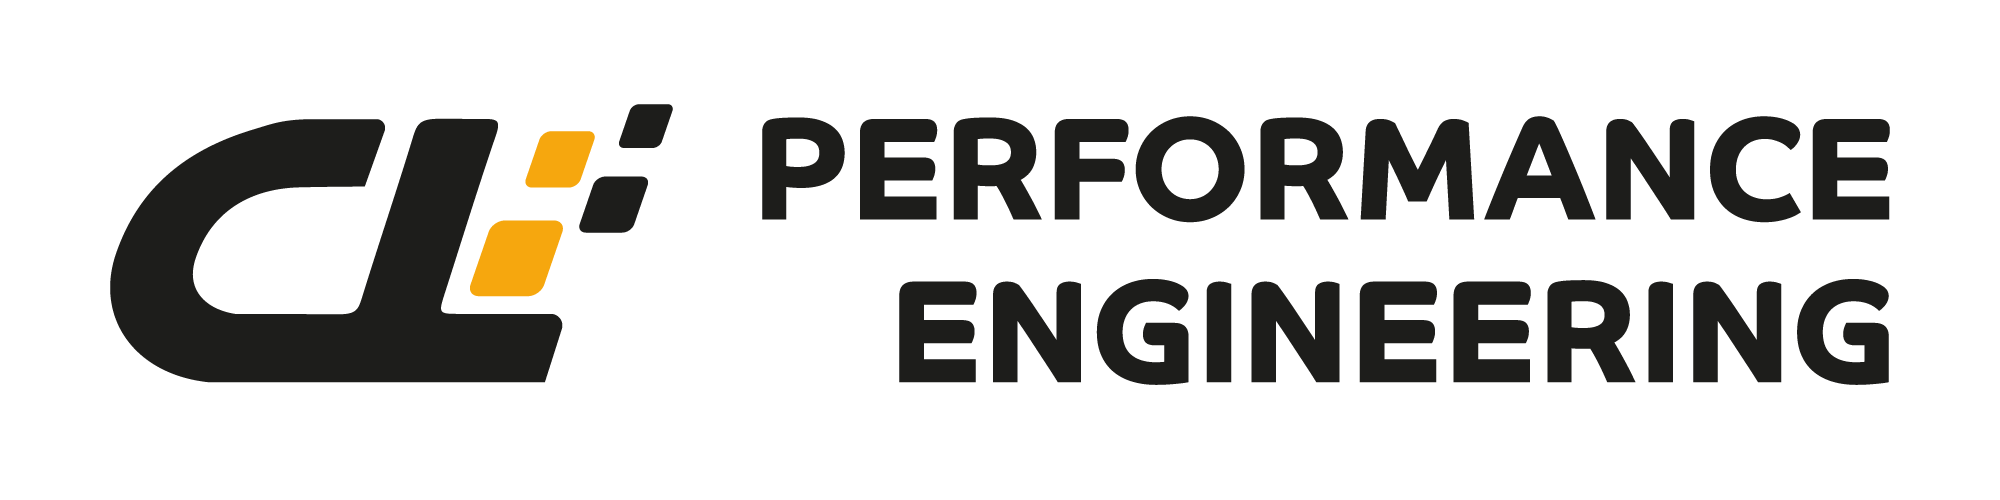 CL Performance Engineering